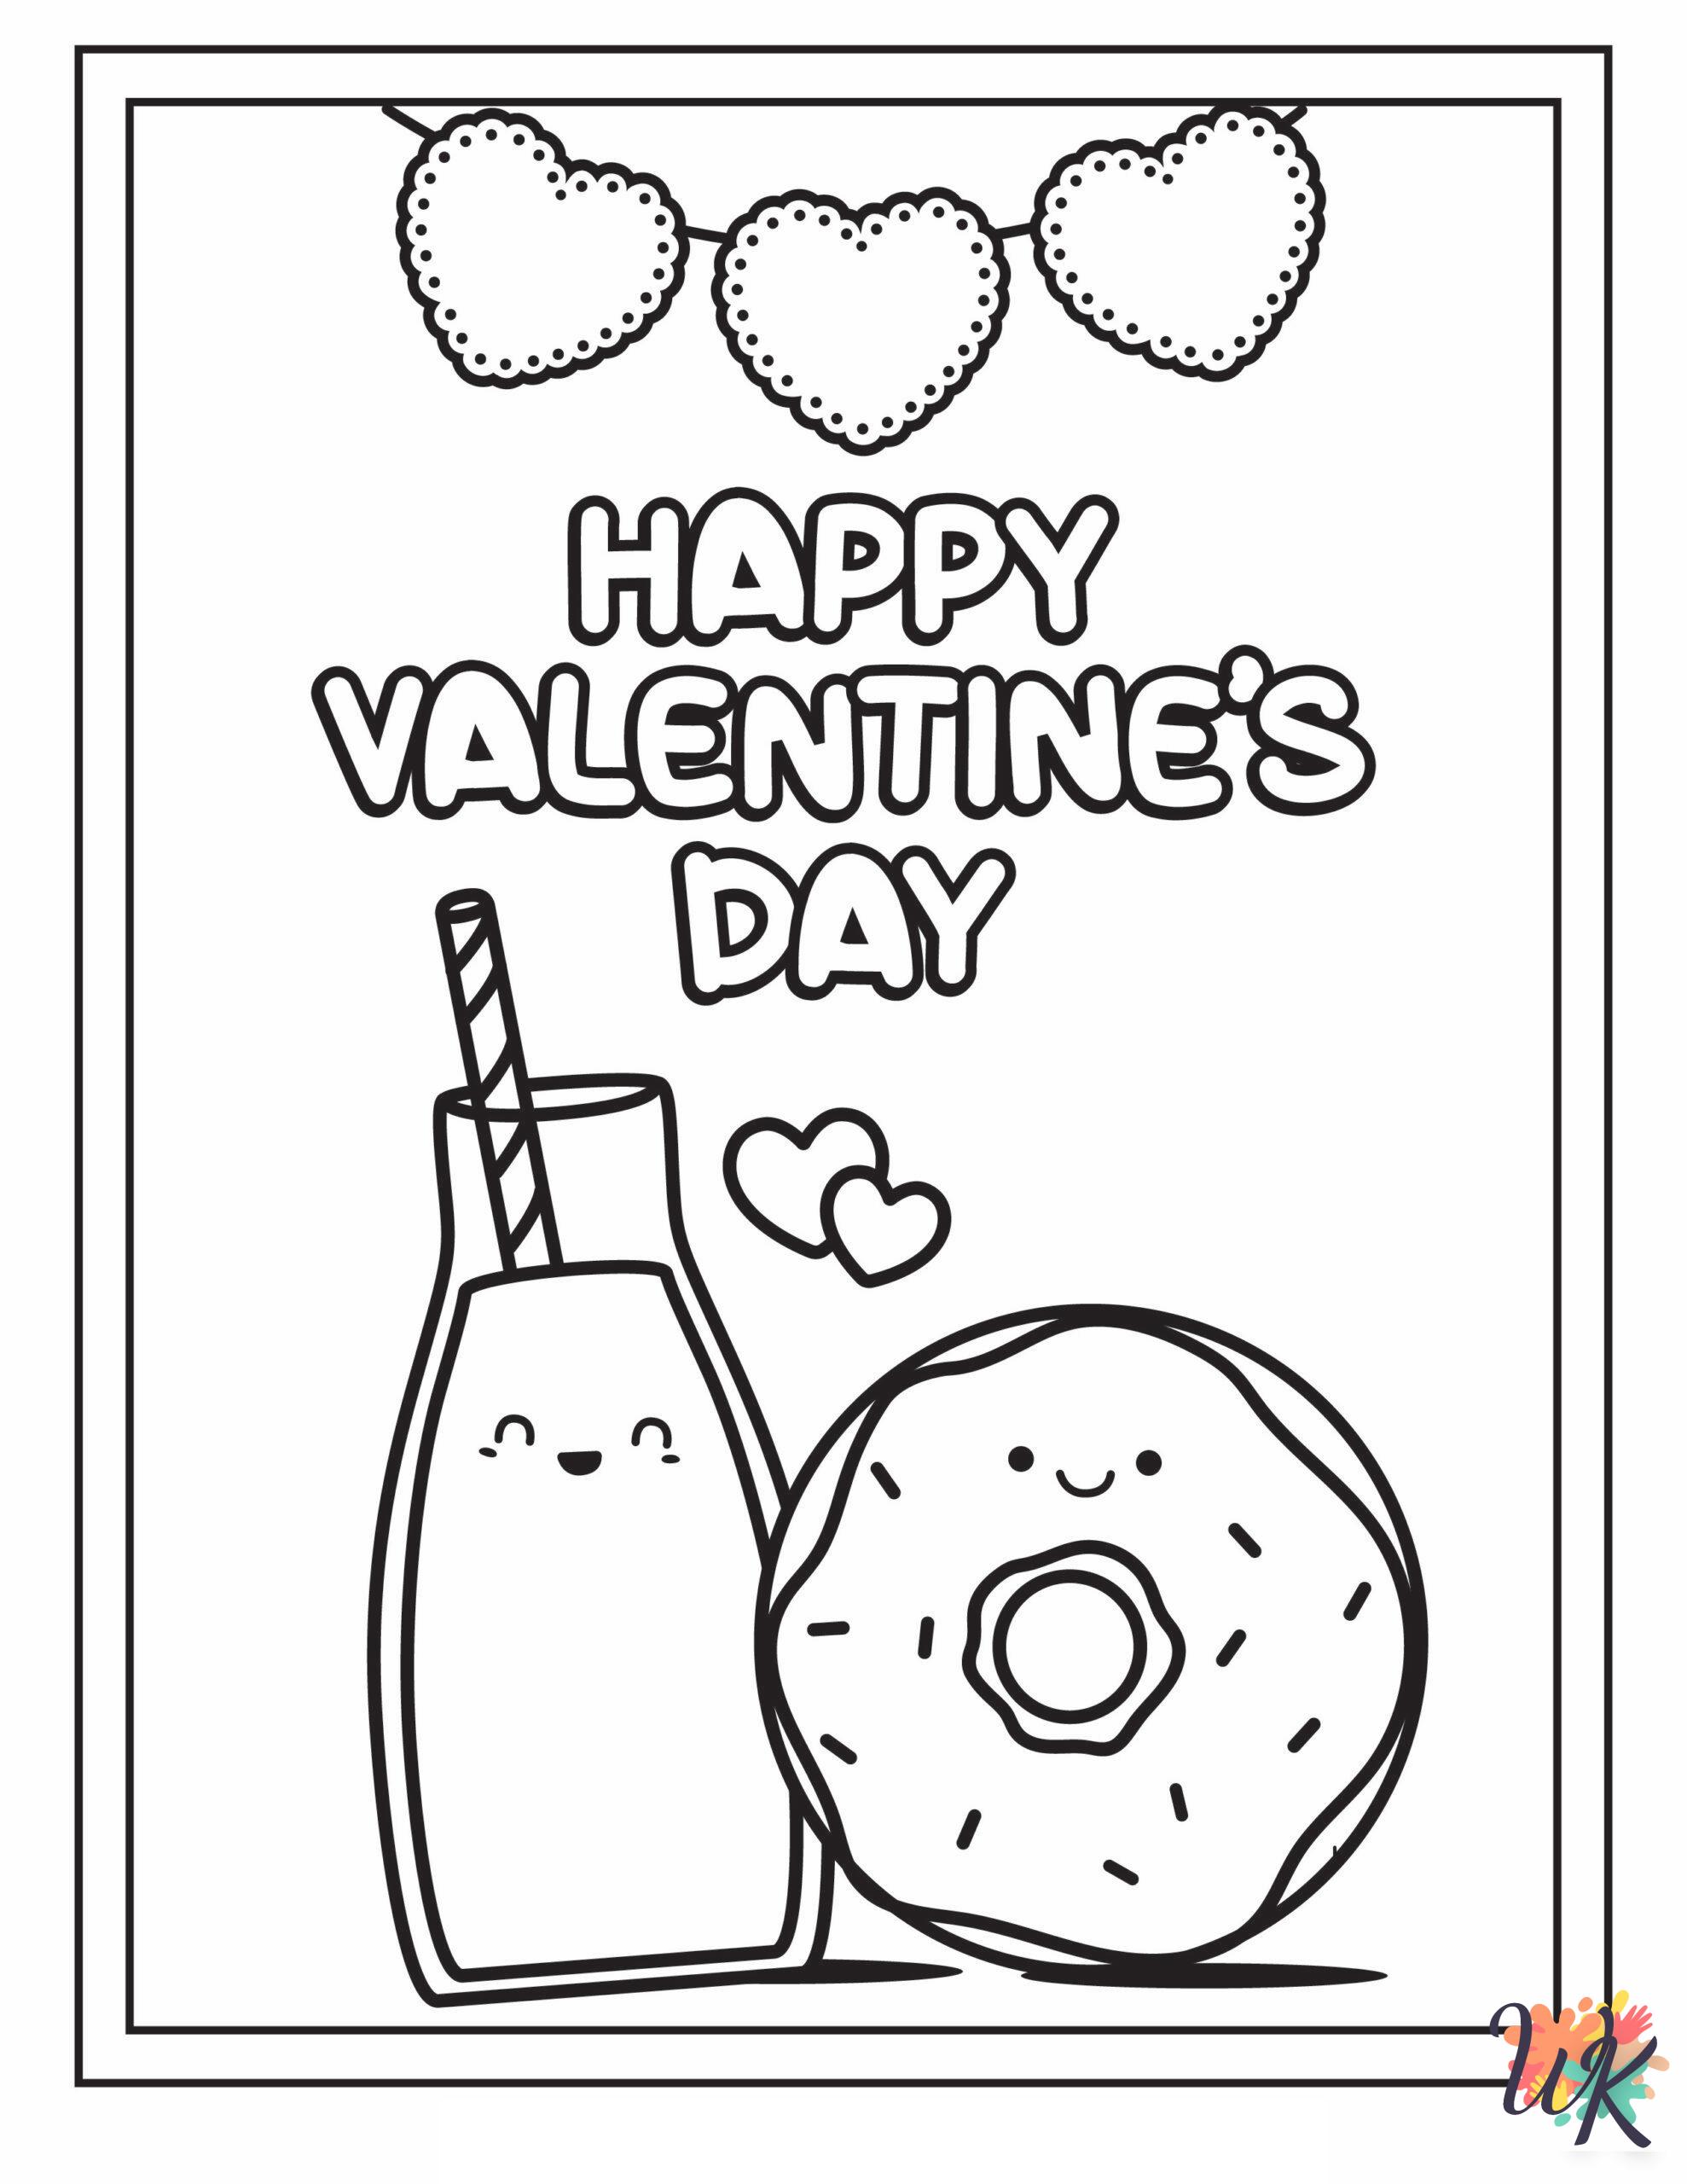 Valentine's Day coloring pages easy